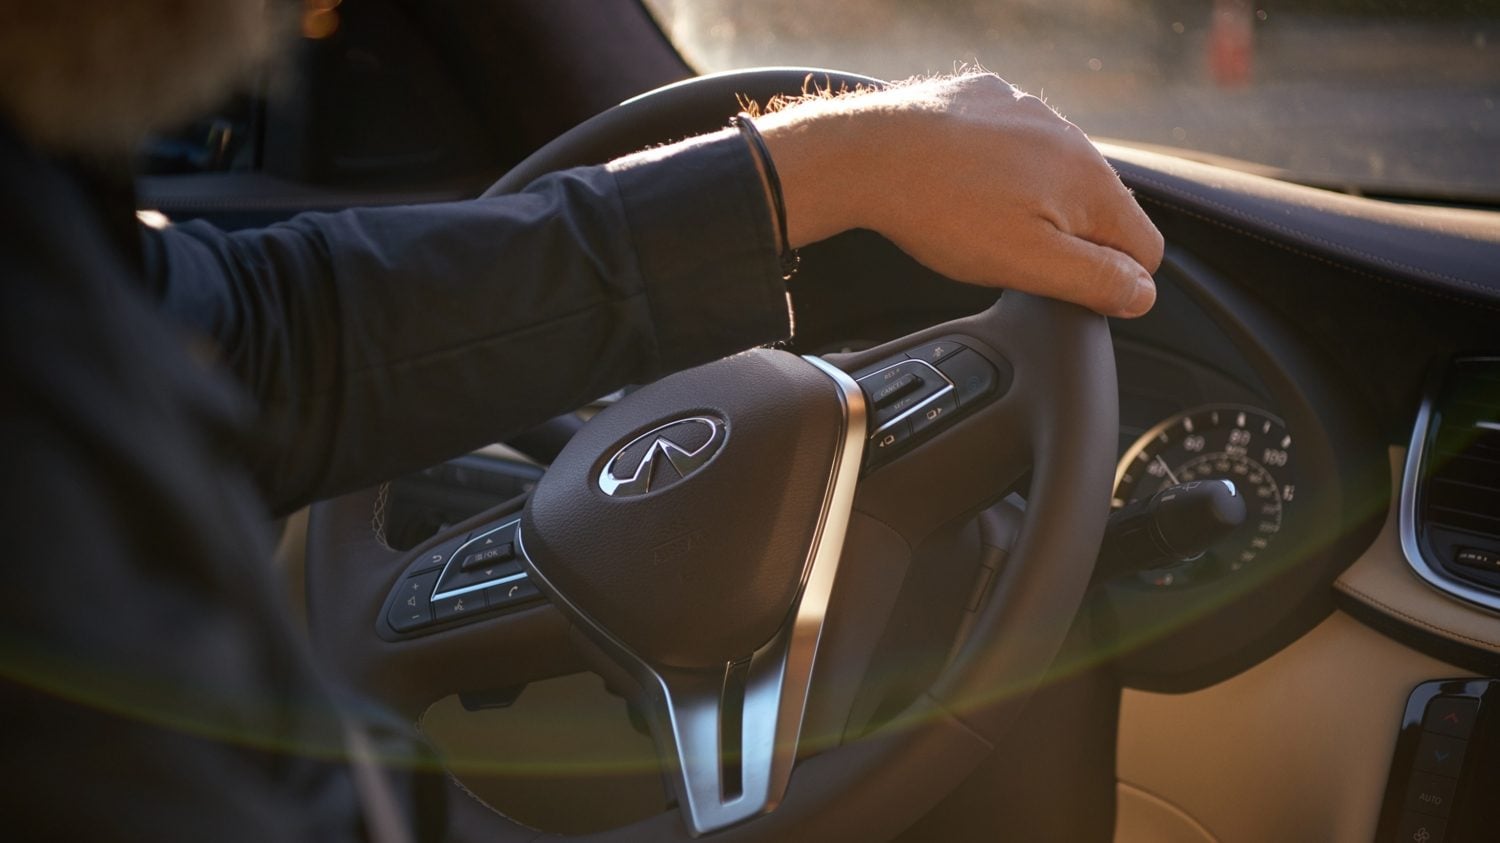 Interior View Of Man With Hand On INFINITI Steering Wheel